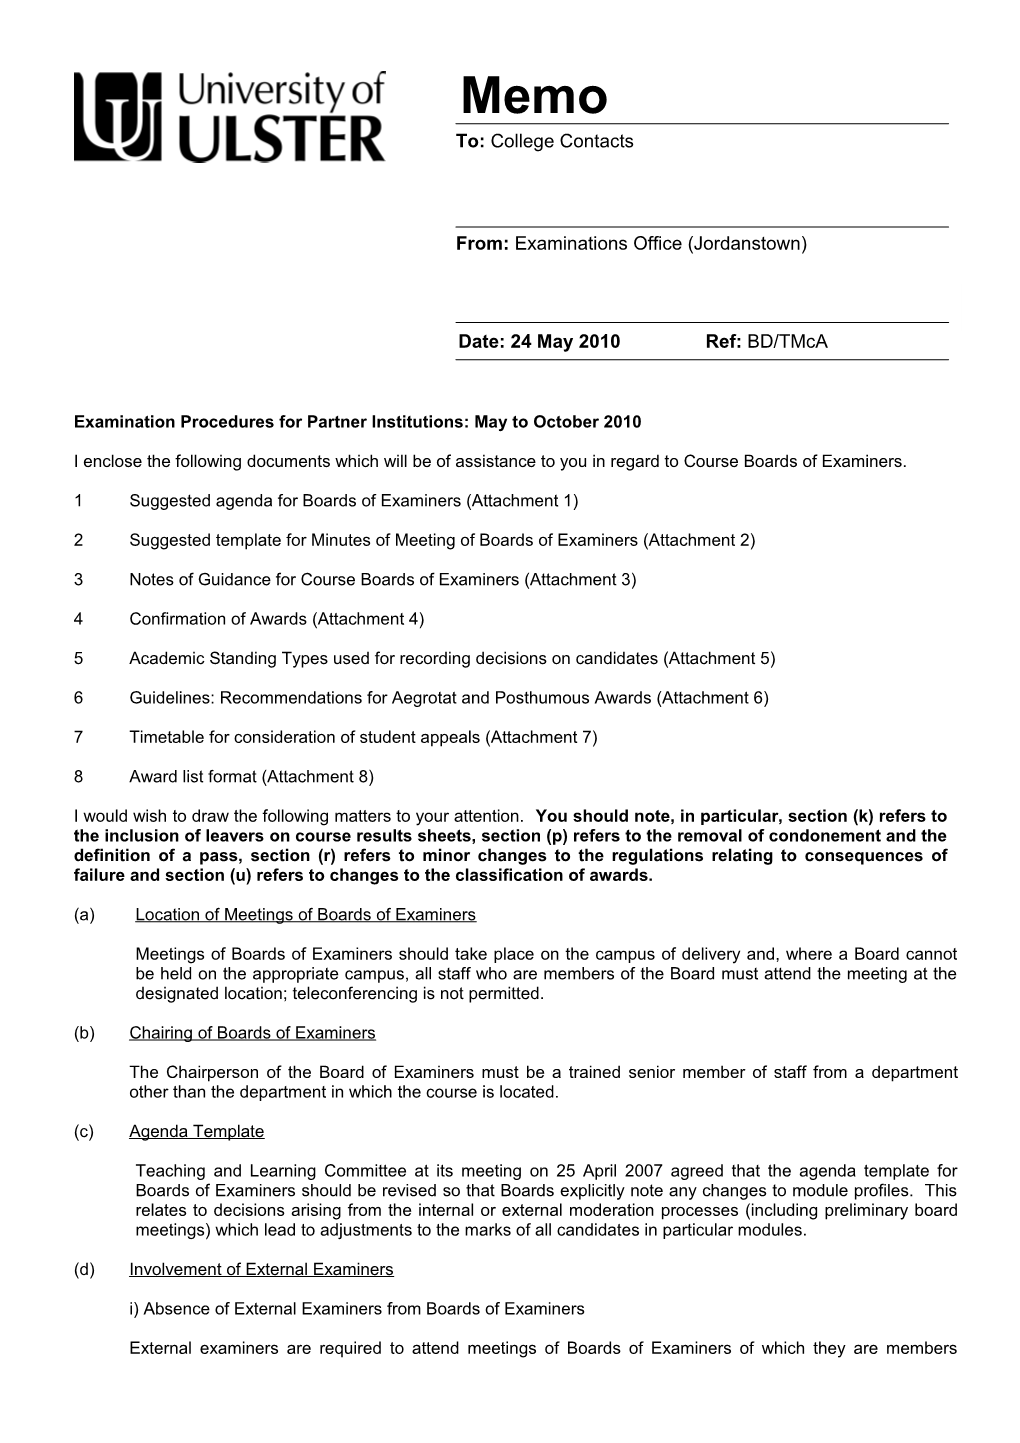 Examination Procedures for Partner Institutions: May to October 2010